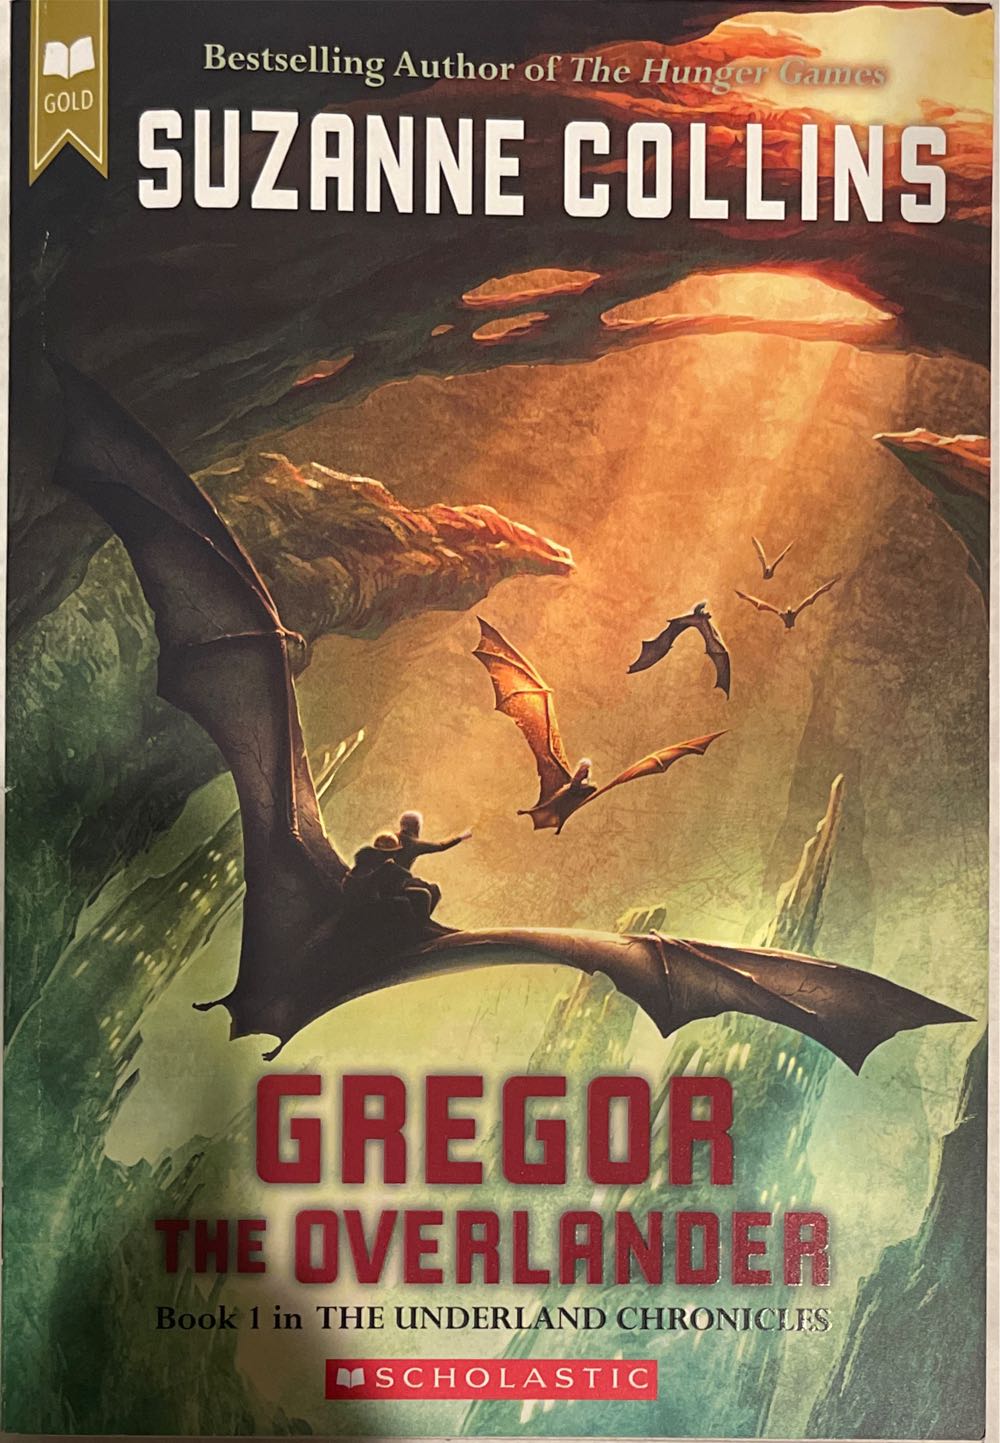 Gregor The Overlander - Suzanne Collins (Scholastic Paperbacks - Paperback) book collectible [Barcode 9780439678131] - Main Image 3